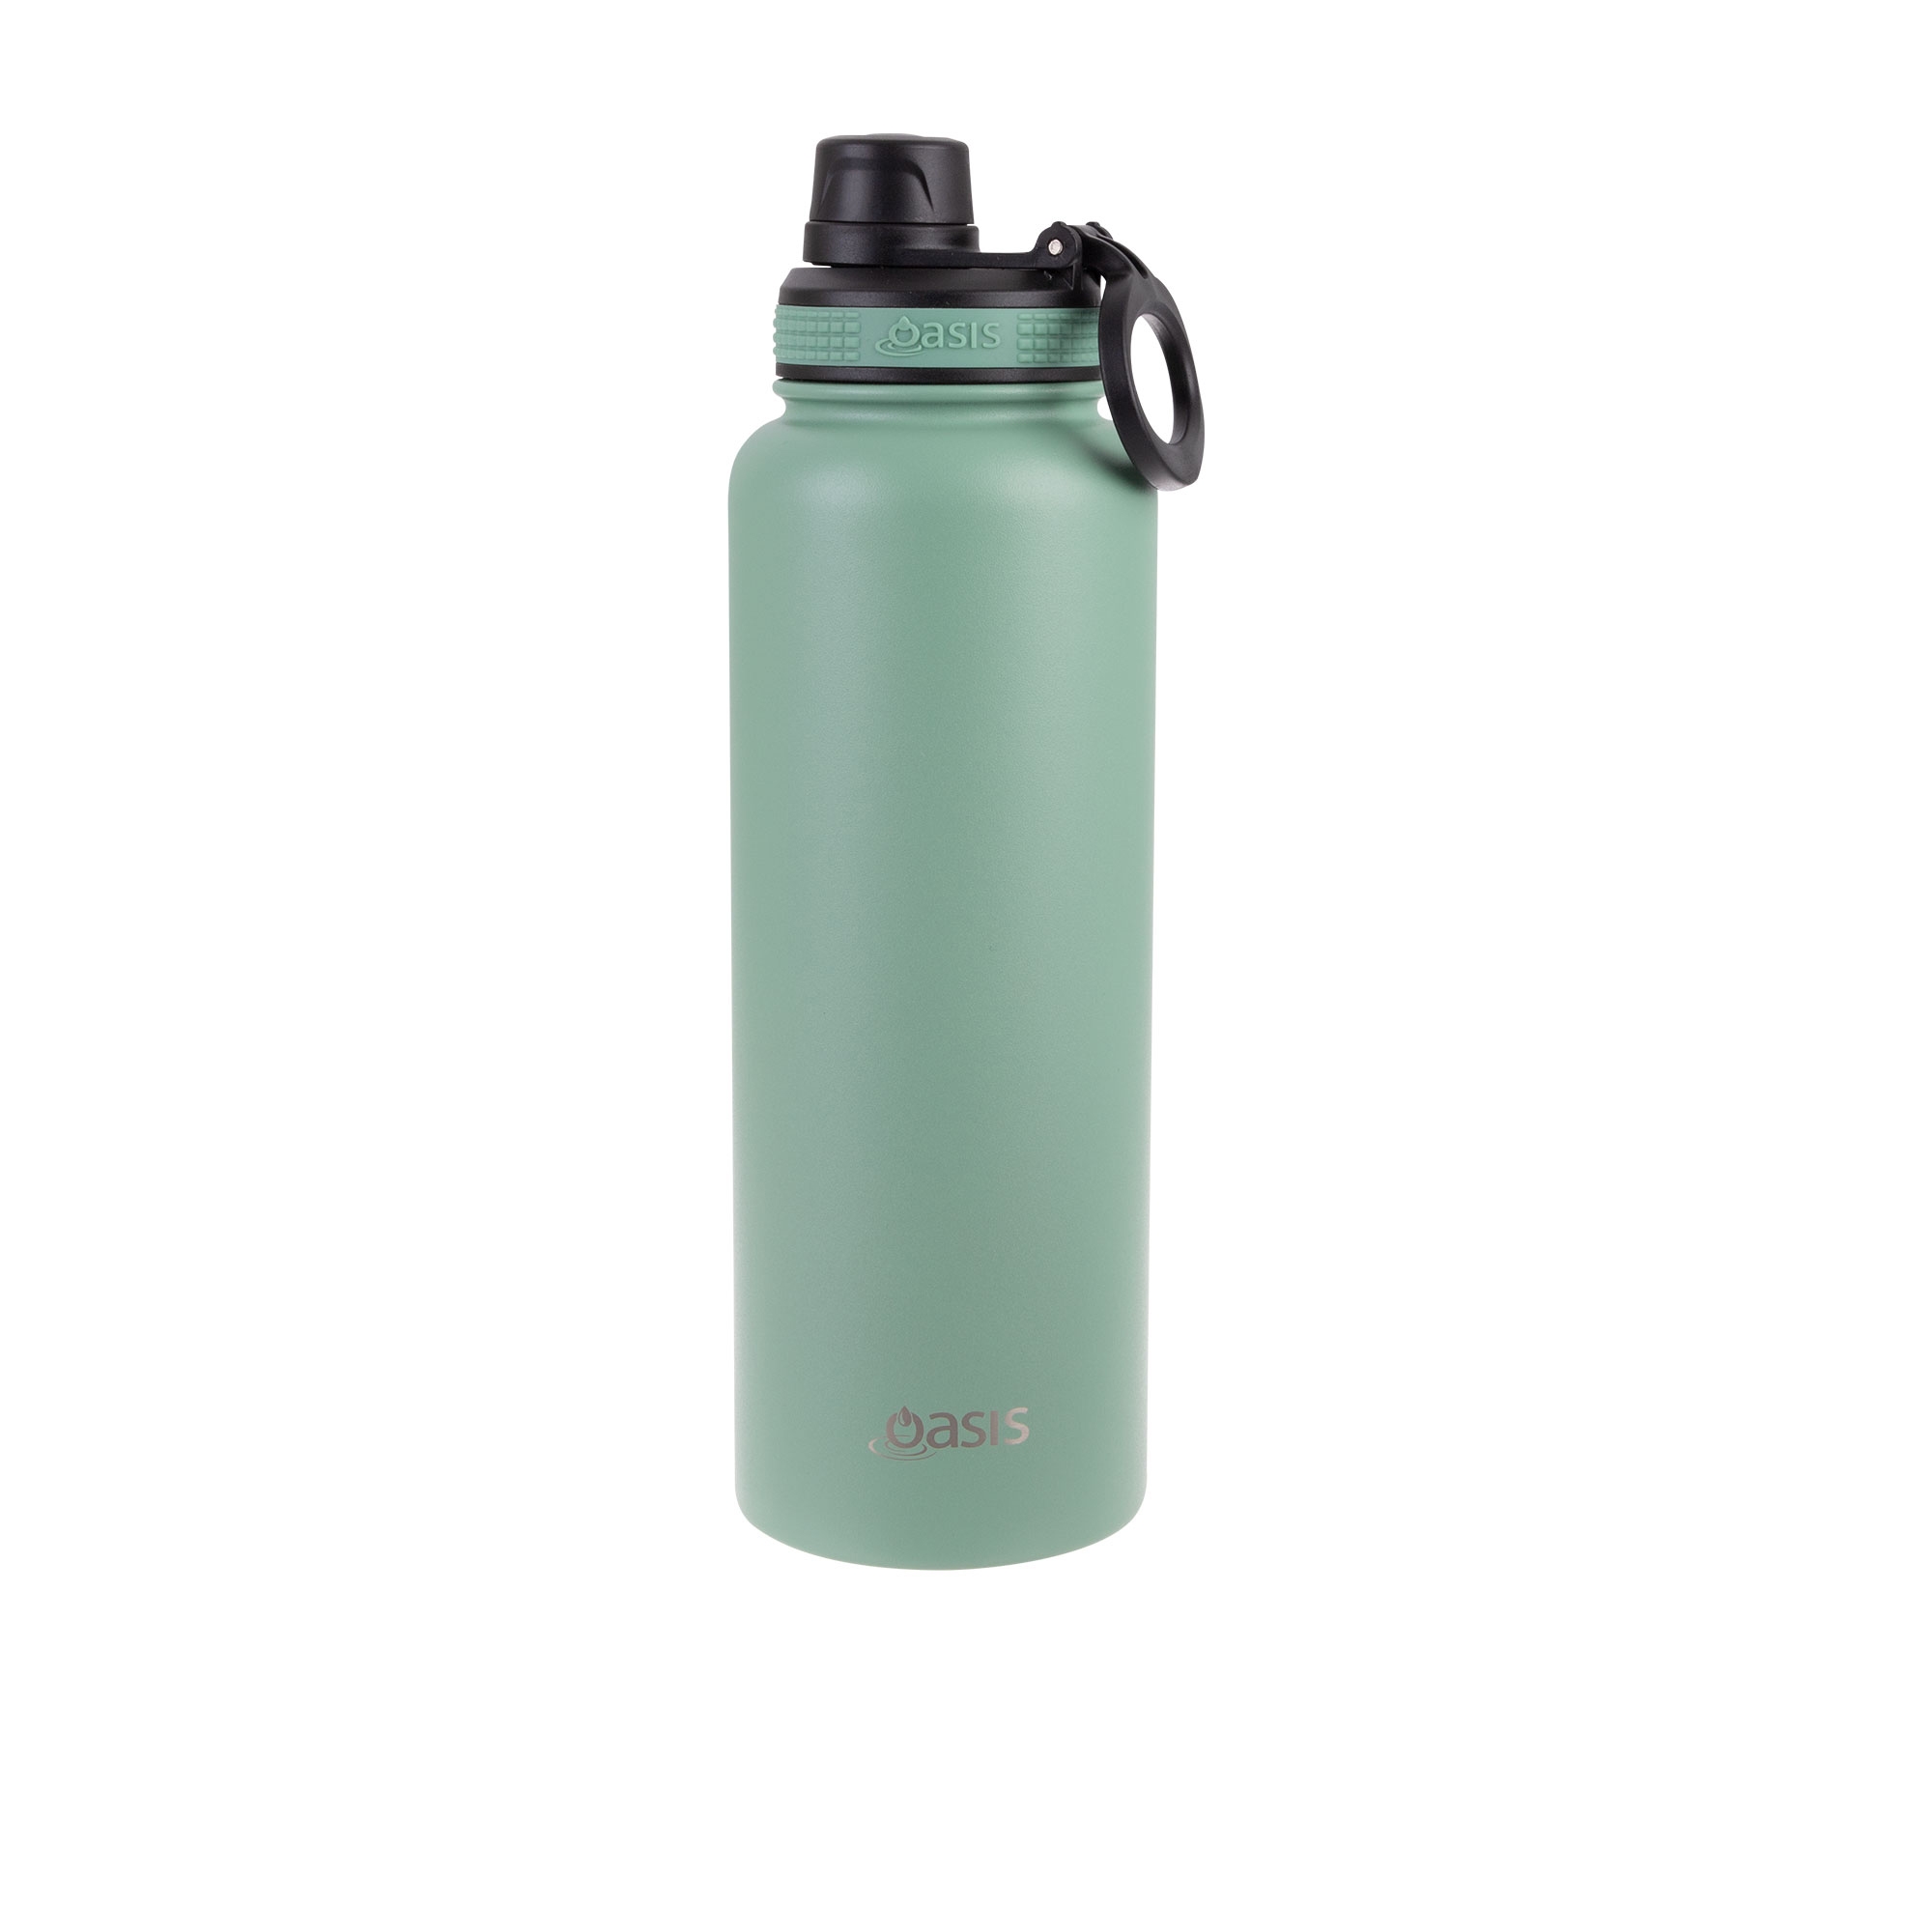 Oasis Challenger Double Wall Insulated Sports Bottle 1.1L Sage Green Image 1